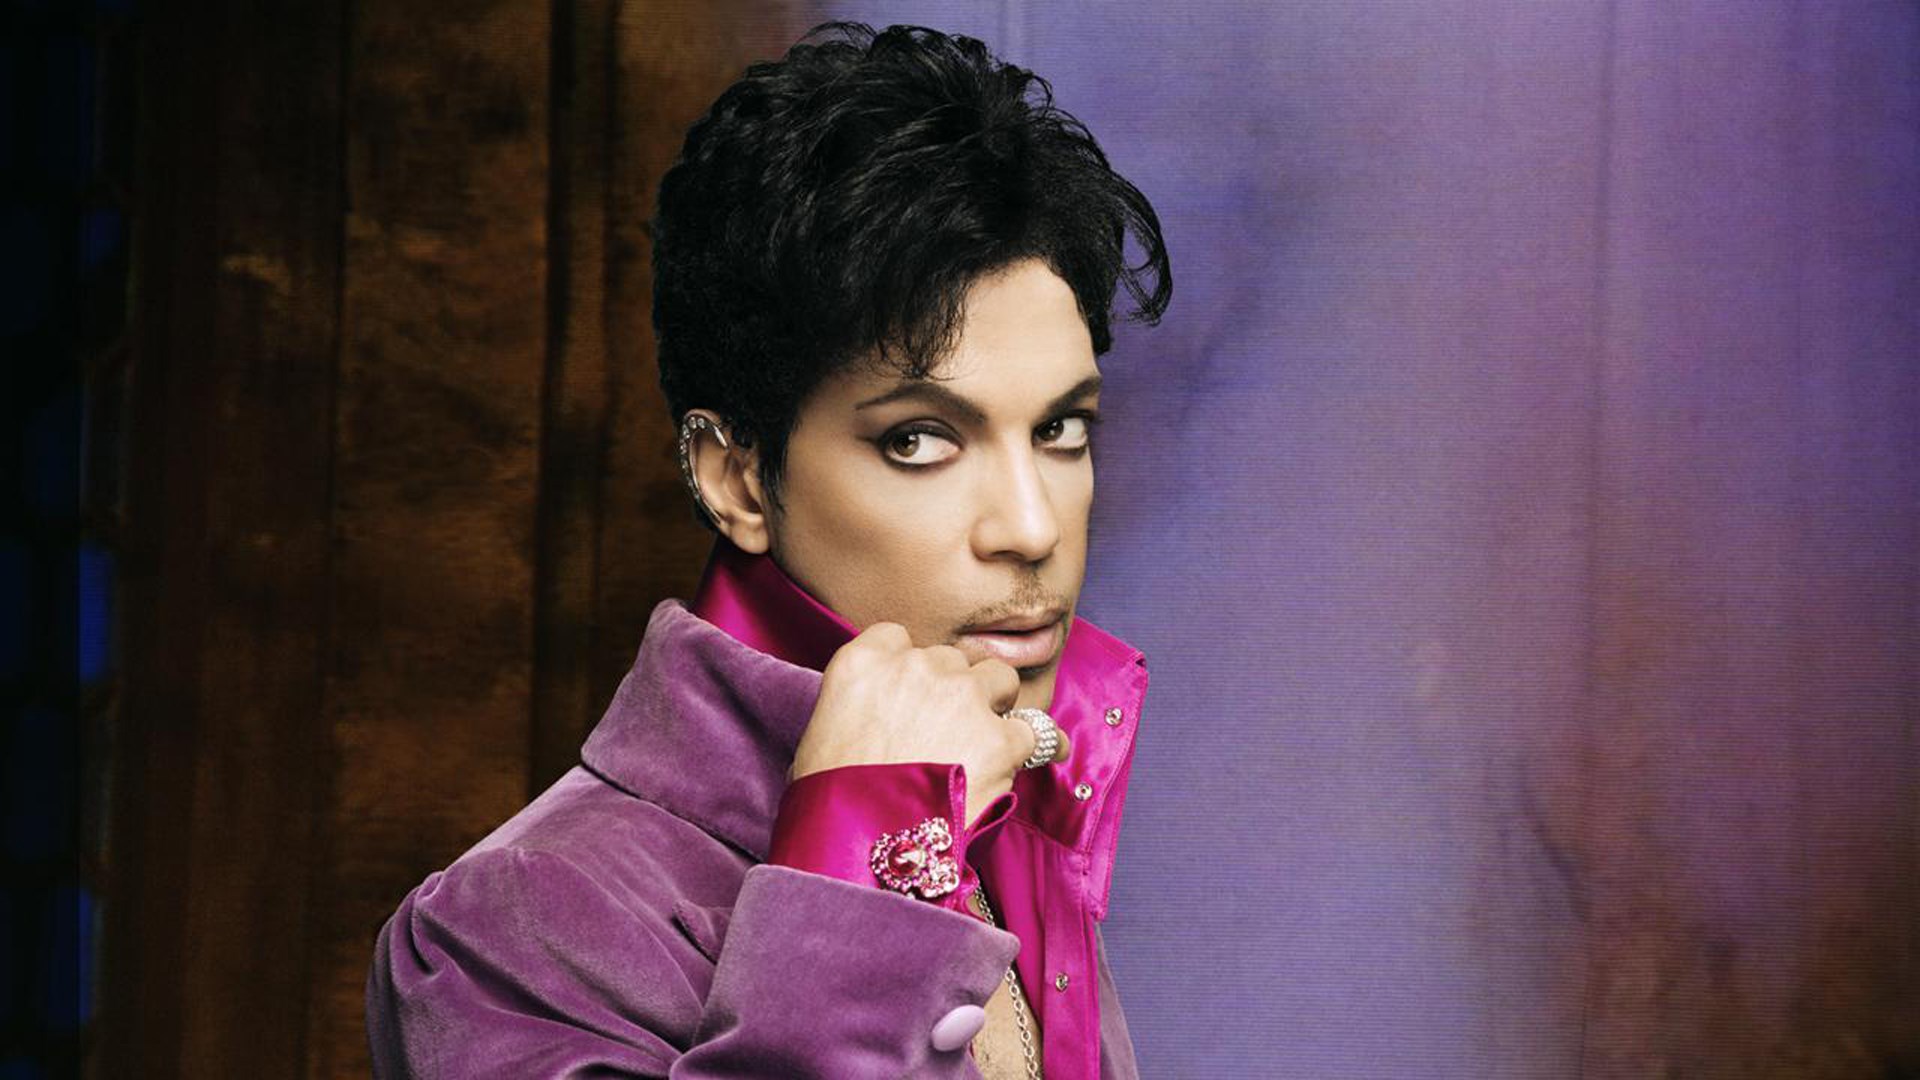 When Doves Cry Prince MP3 Free Download